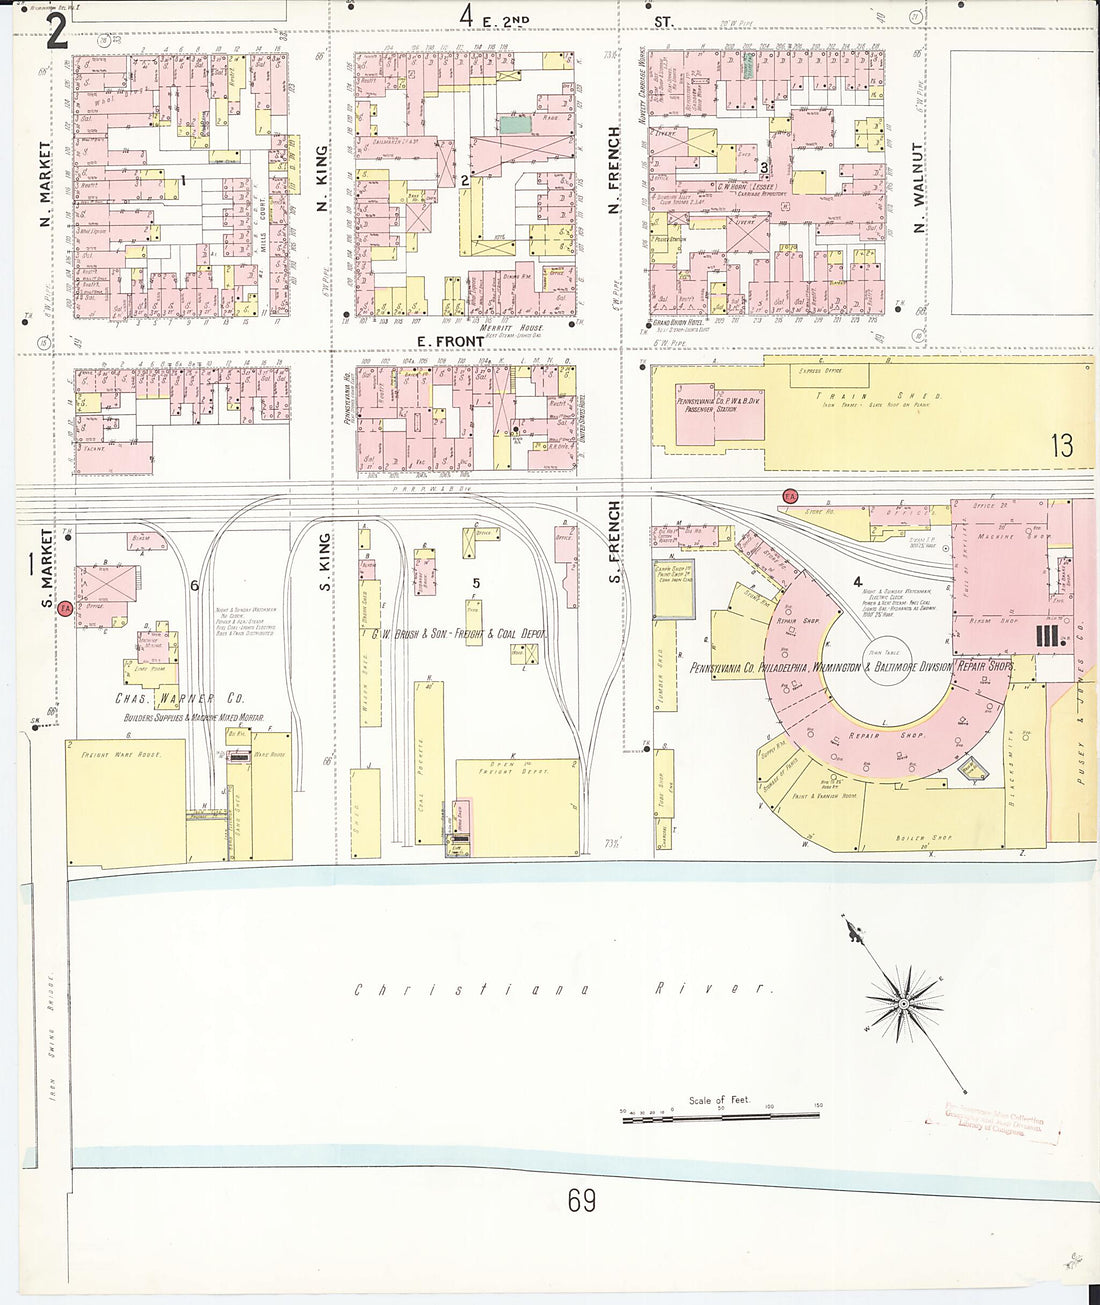 This old map of Wilmington, New Castle County, Delaware was created by Sanborn Map Company in 1901